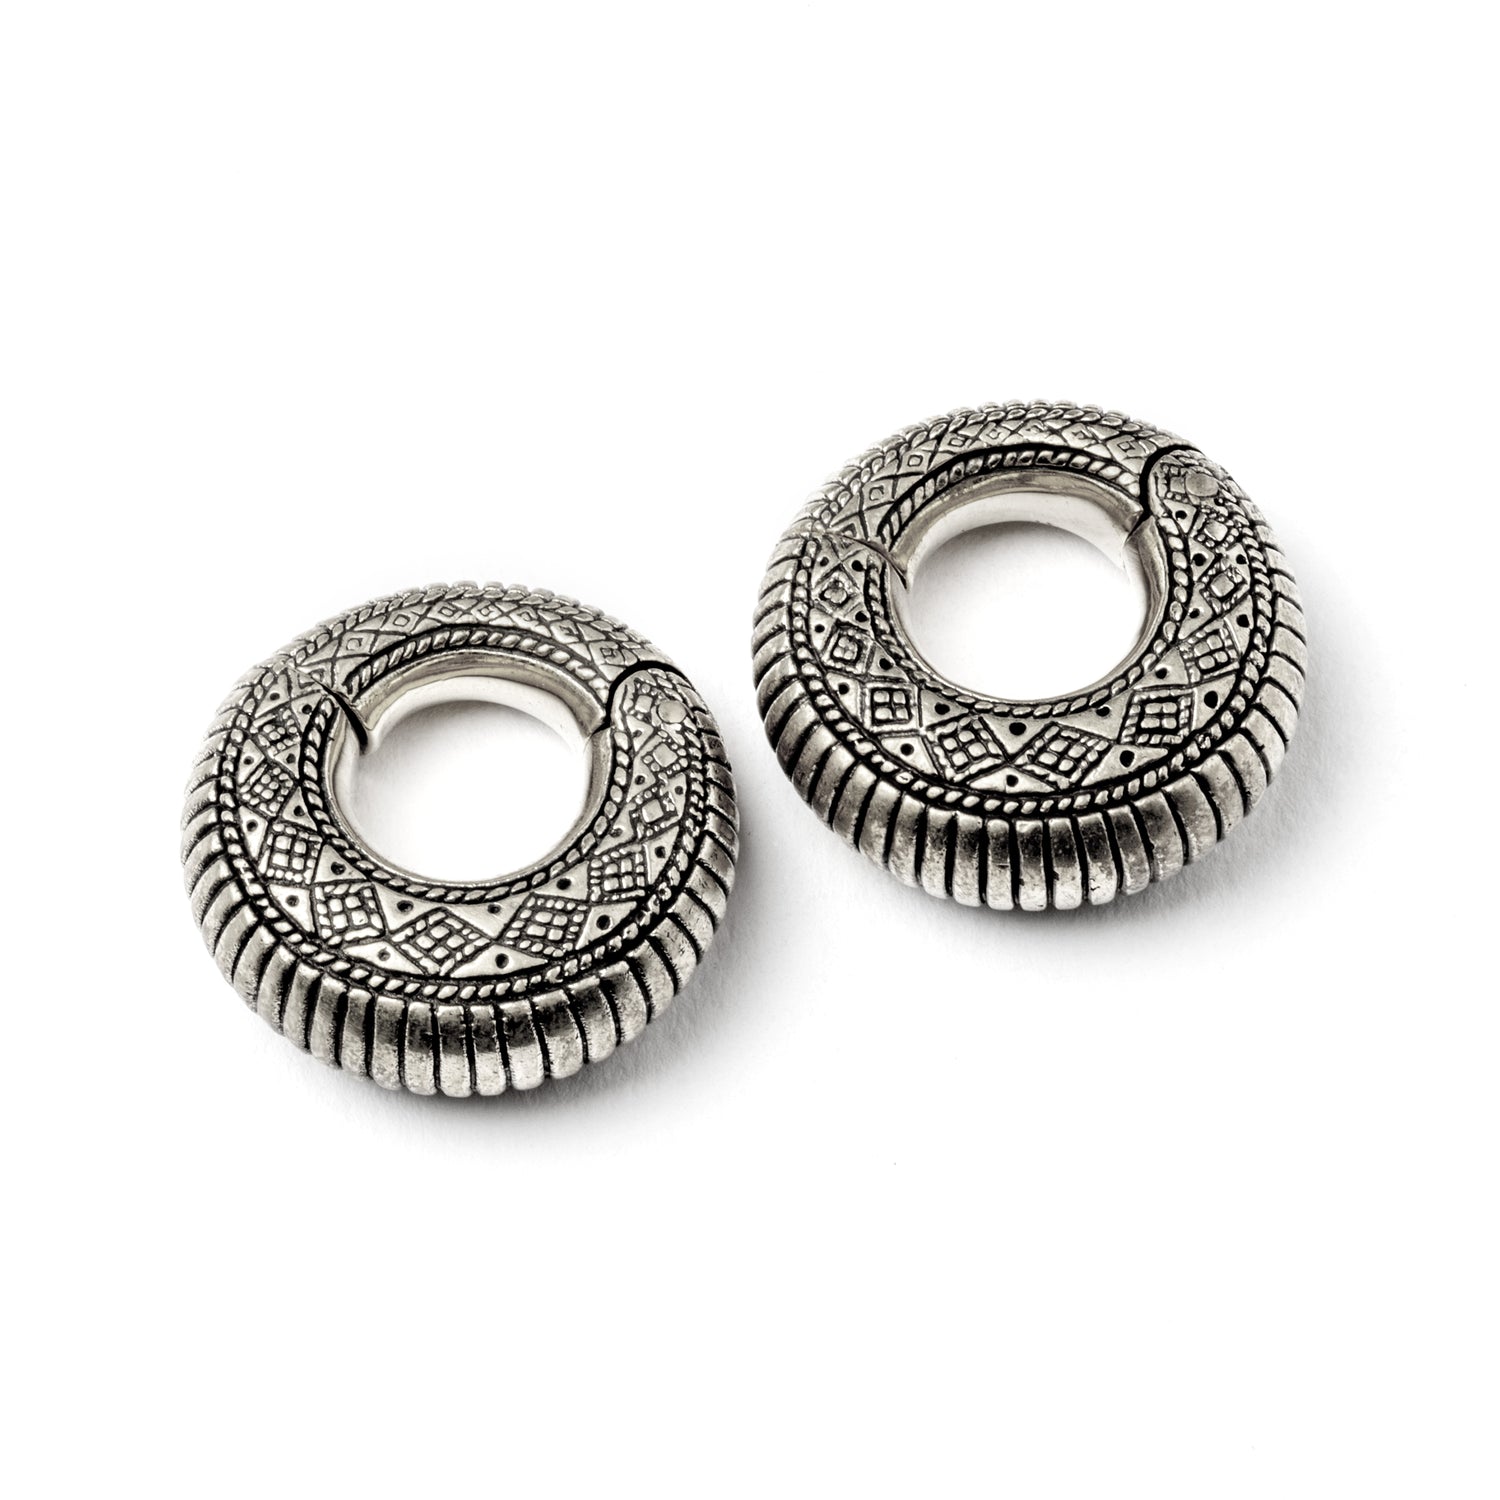 pair of silver brass ear weights hoops with geometric tribal engraved pattern right frontal view